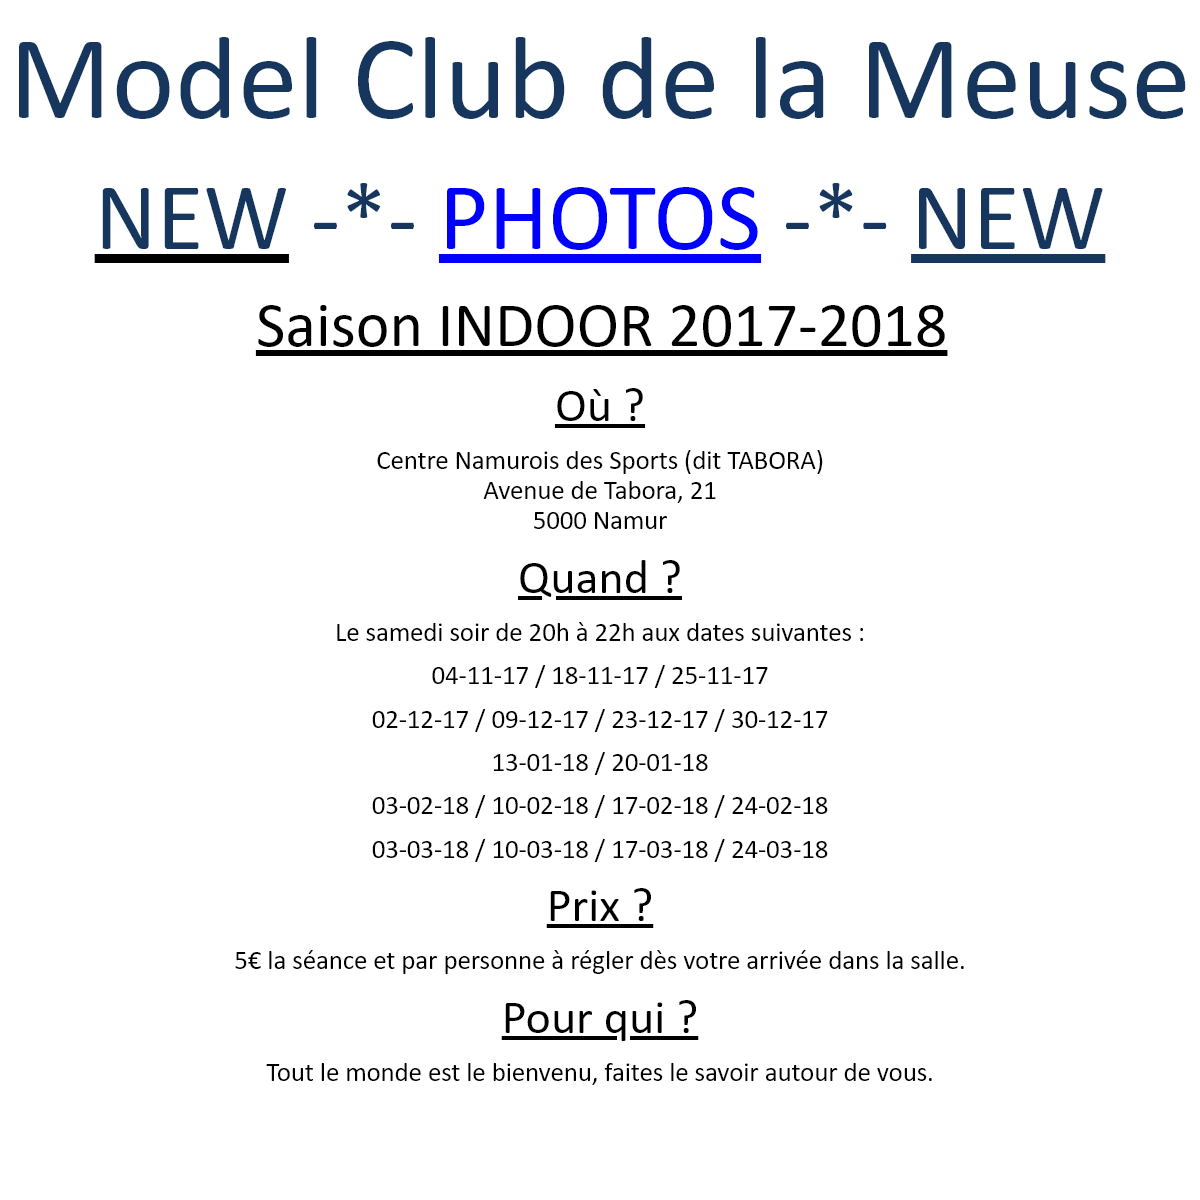 A complete backup of modelclubdelameuse.be